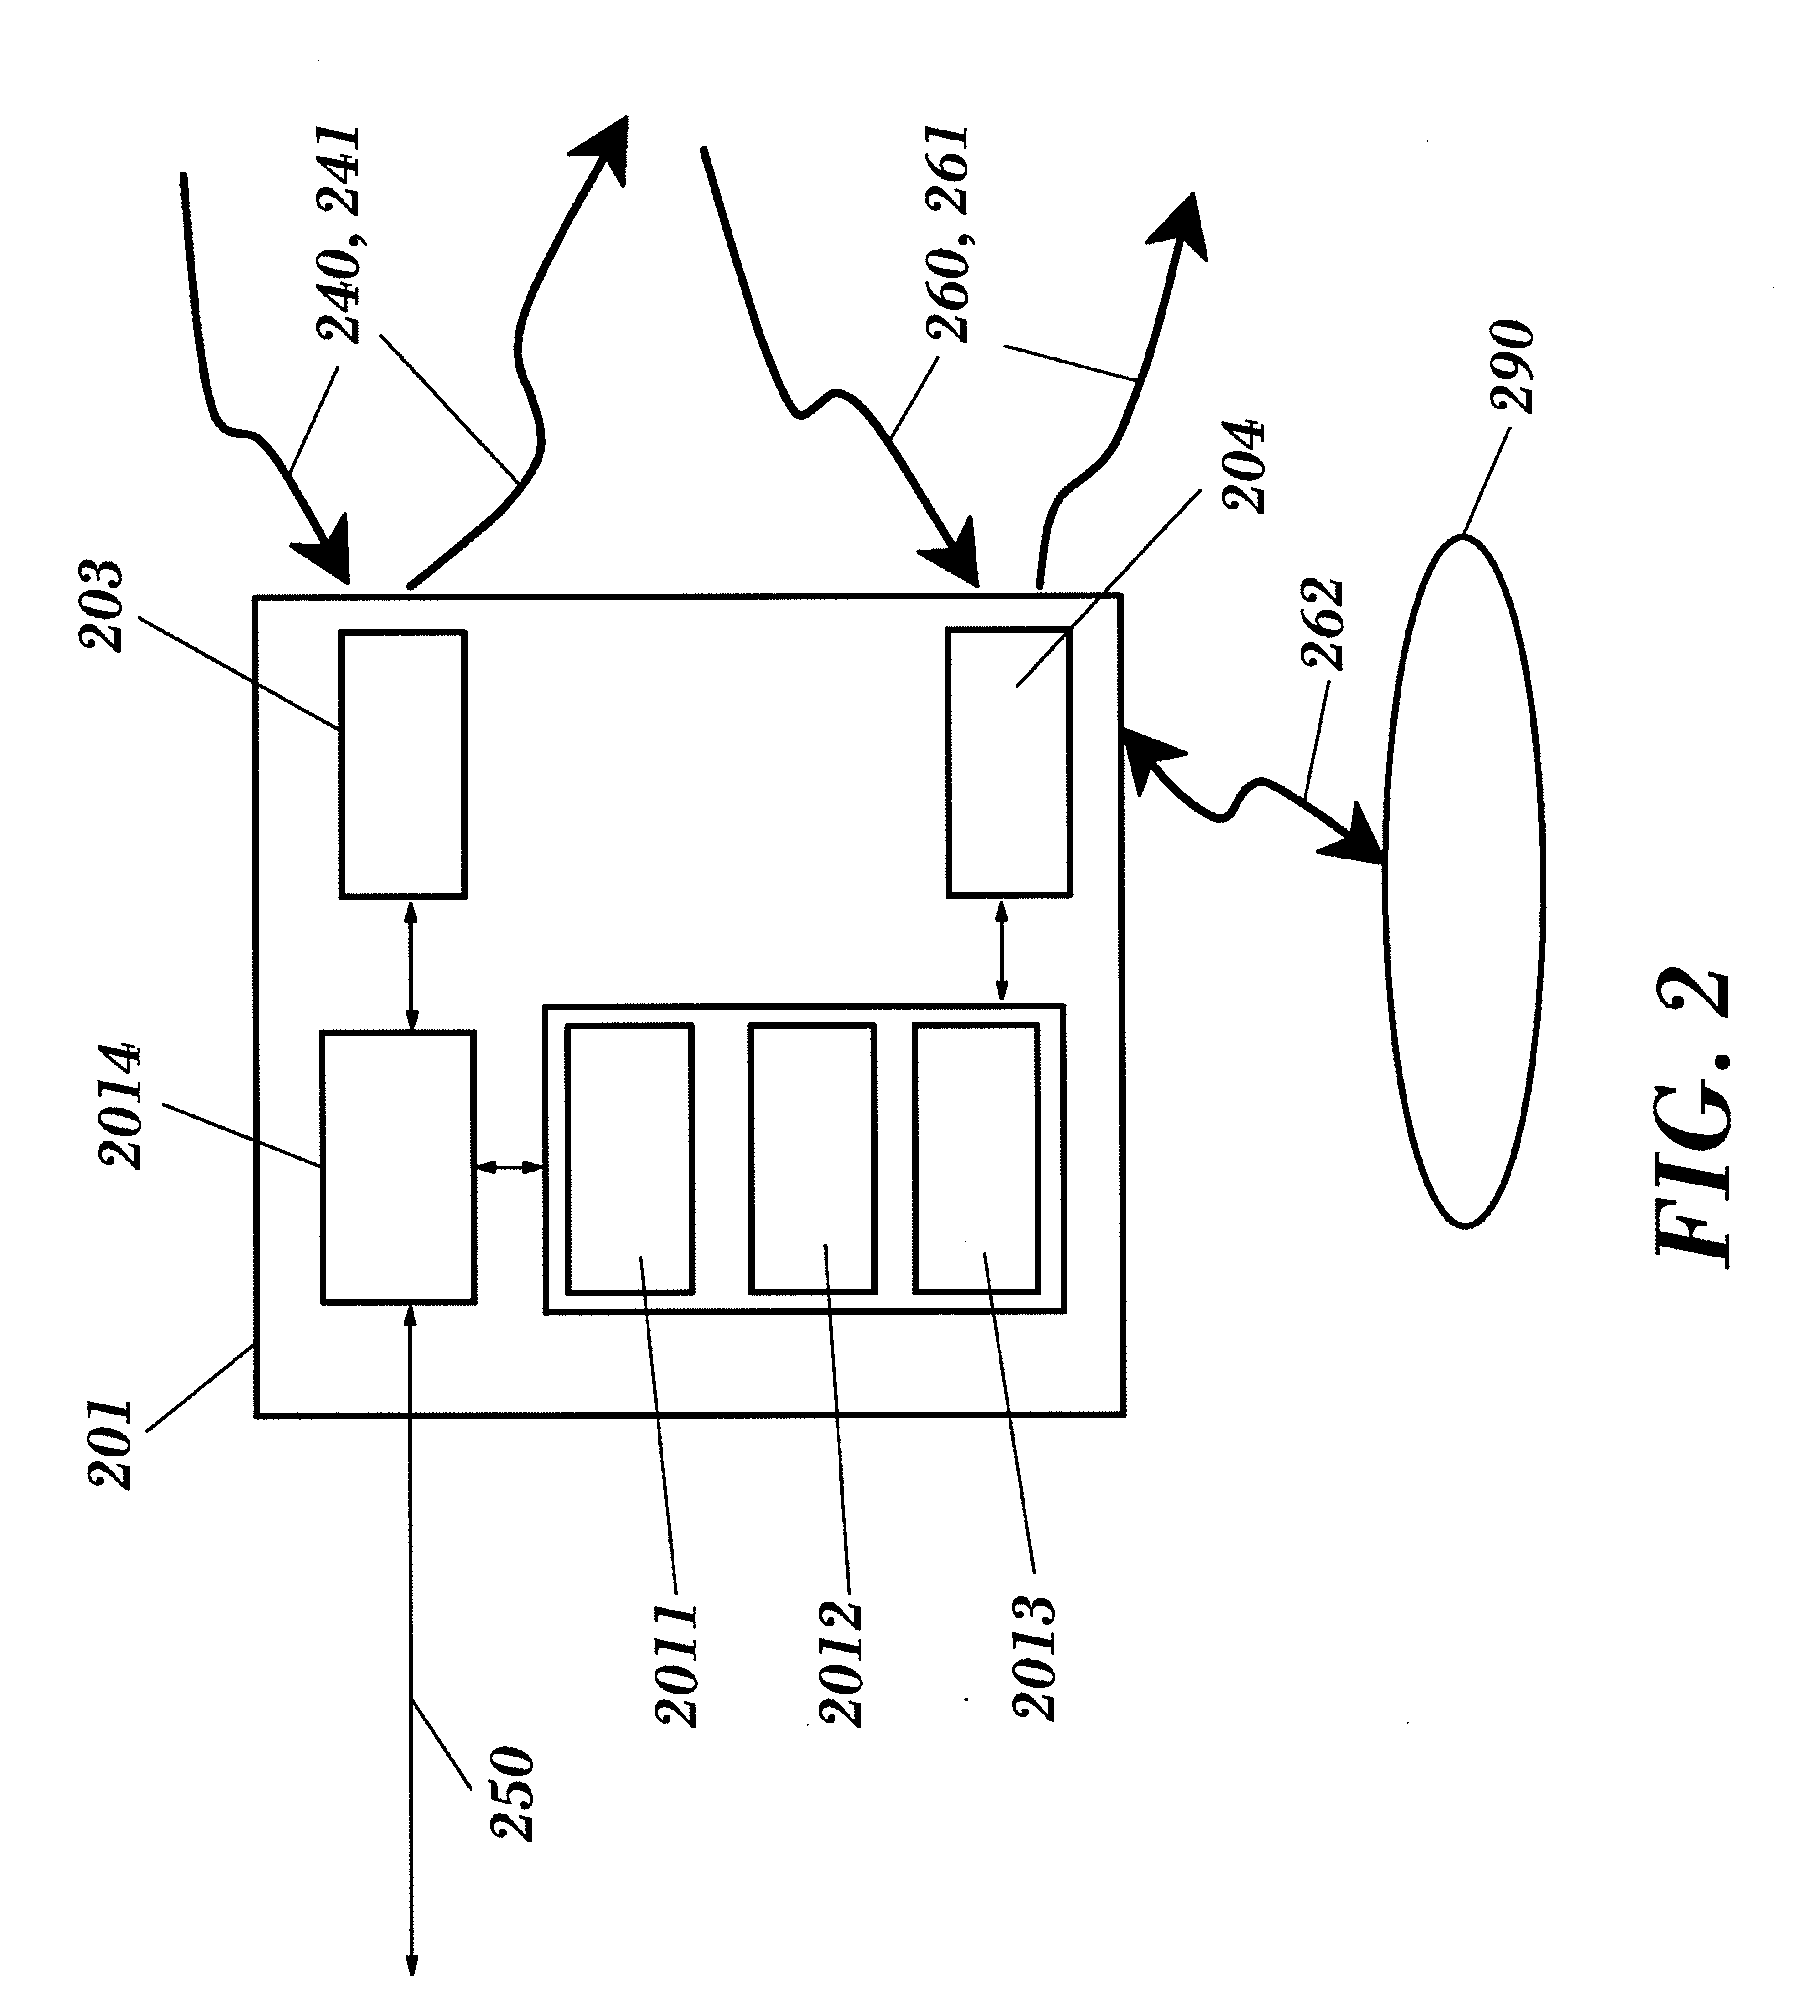 System for distributing broadband wireless signals indoors